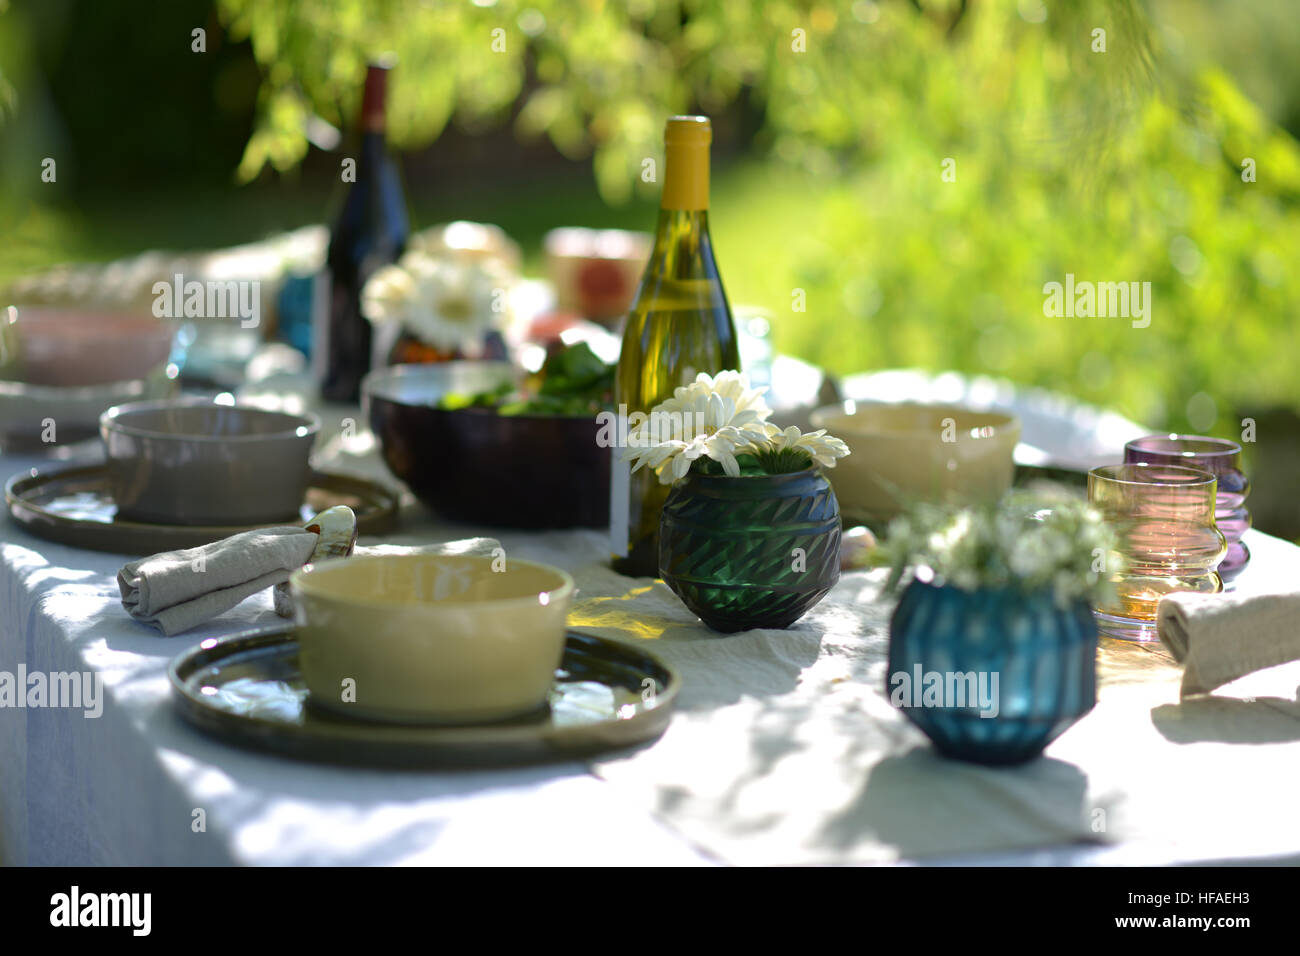 Alfresco dining, table set for an evening meal outside Stock Photo